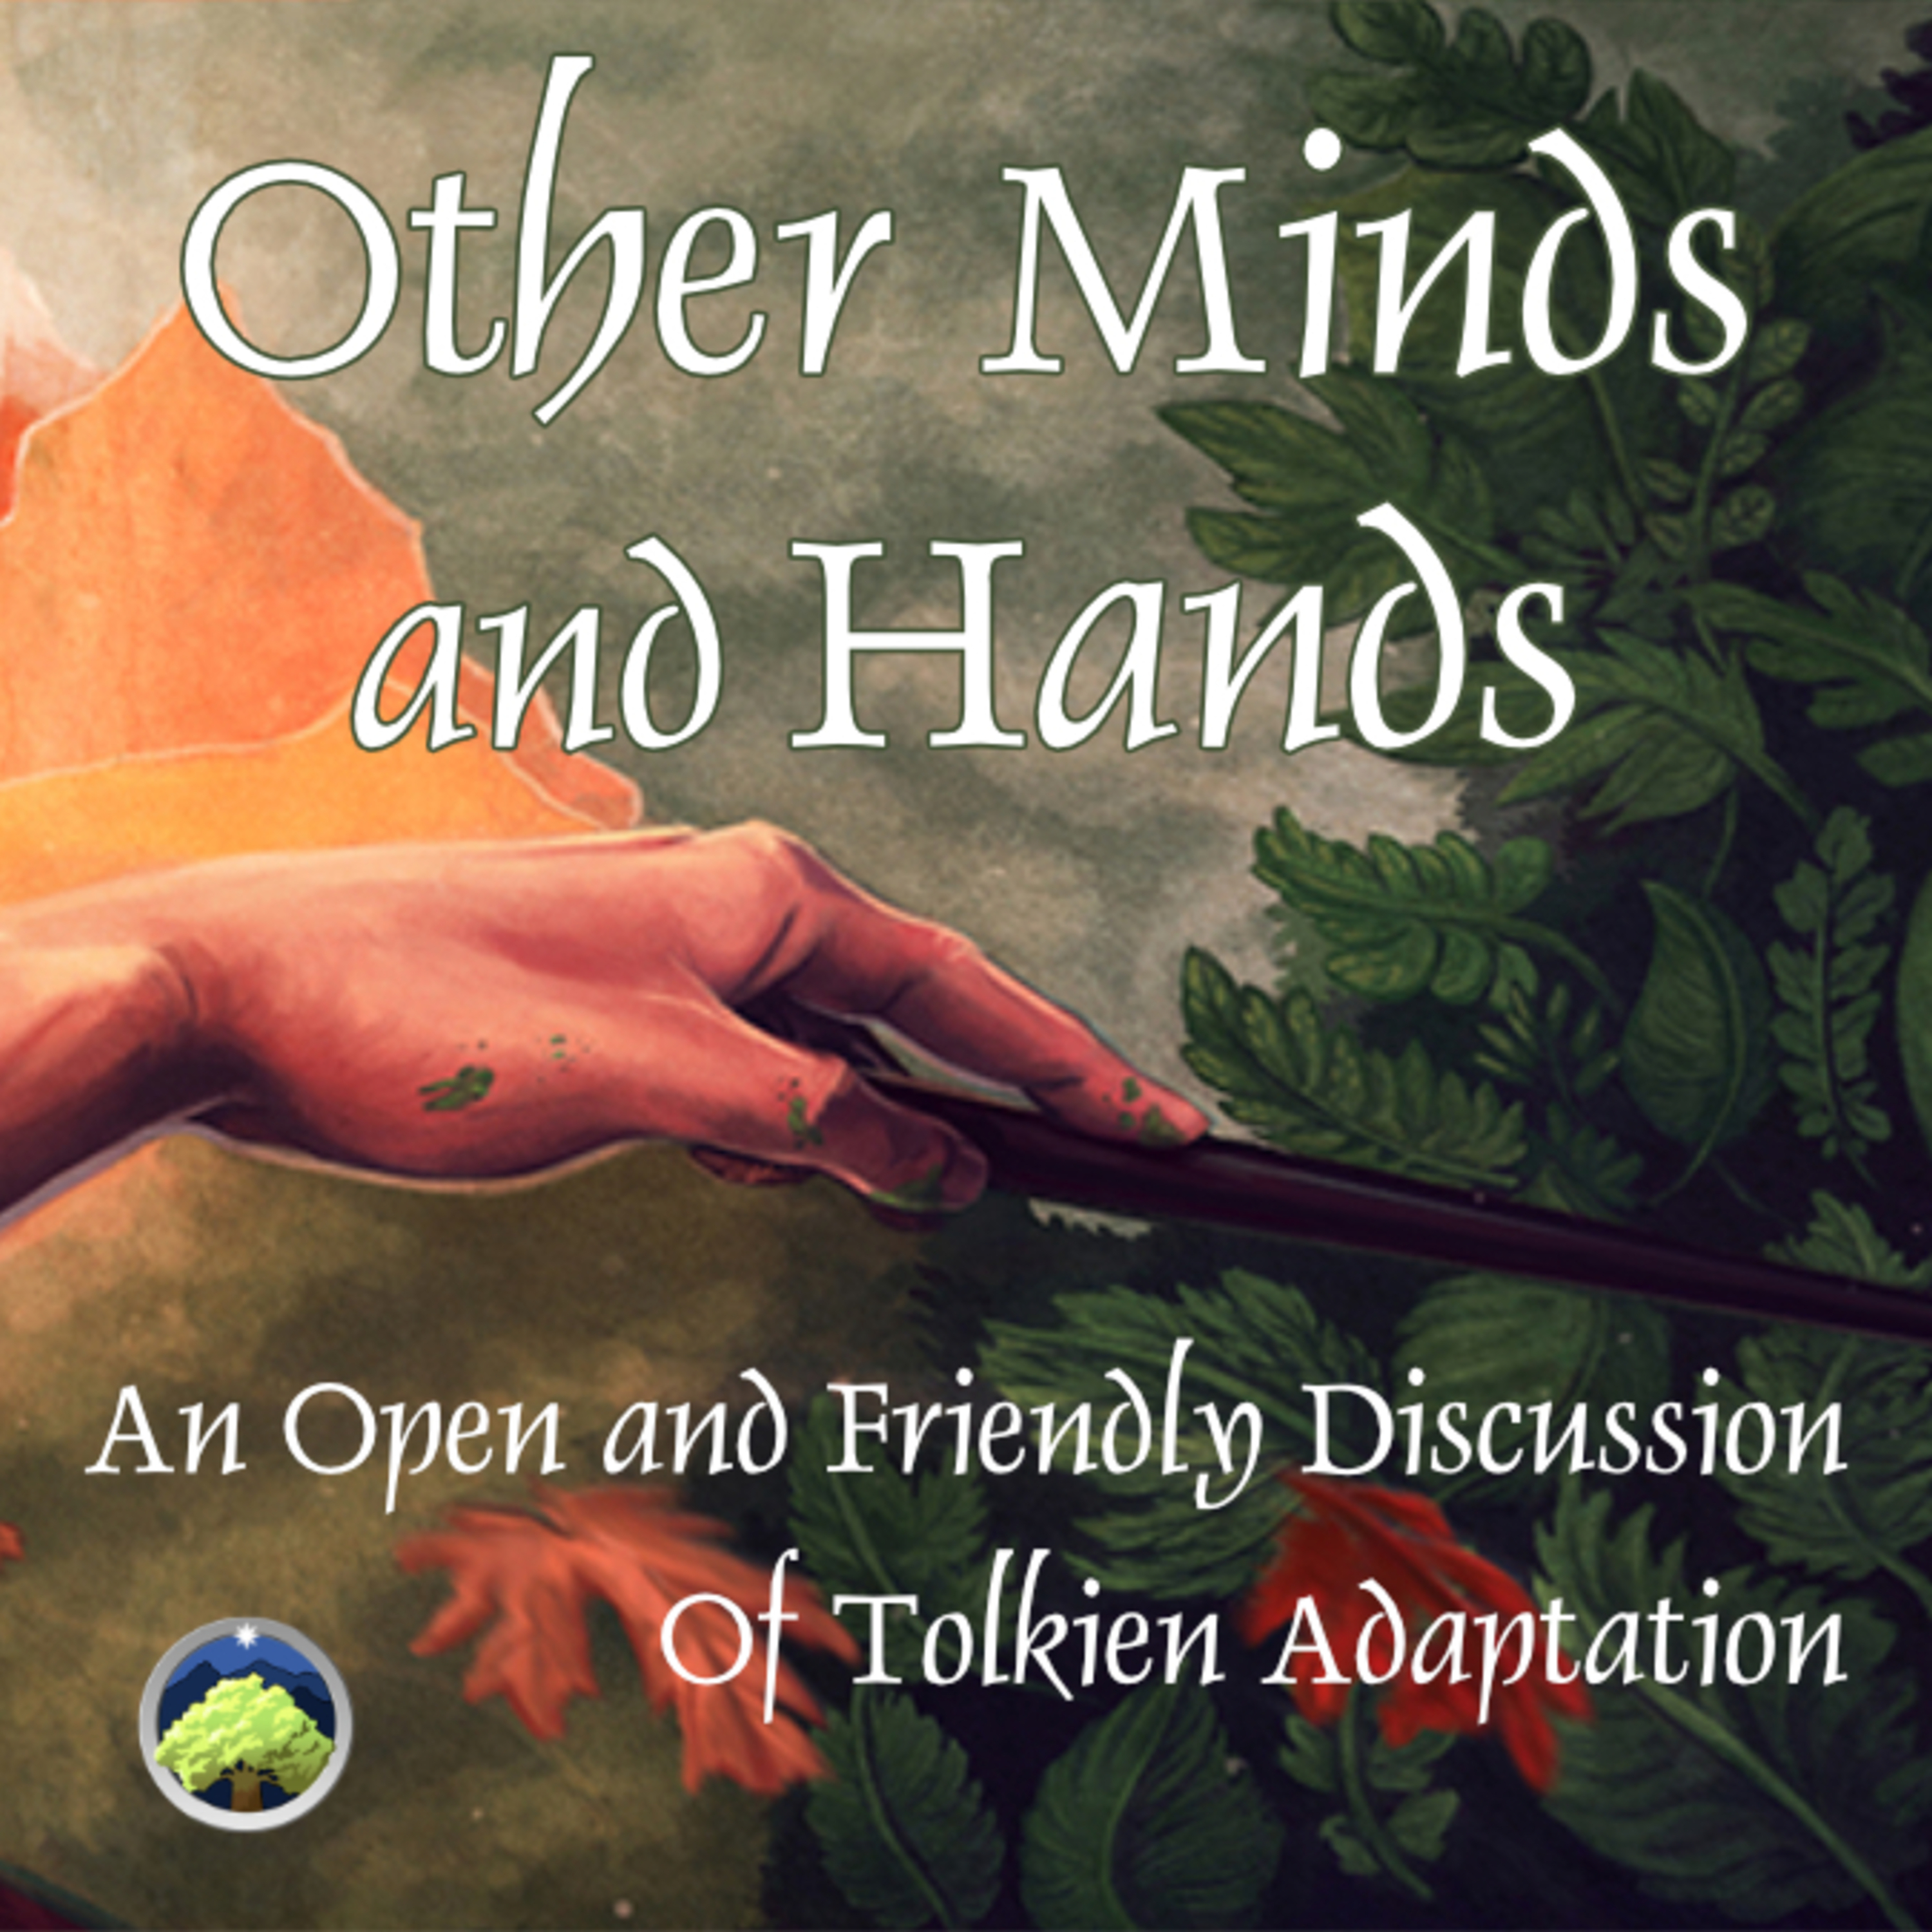 546: Other Minds and Hands, Episode 56